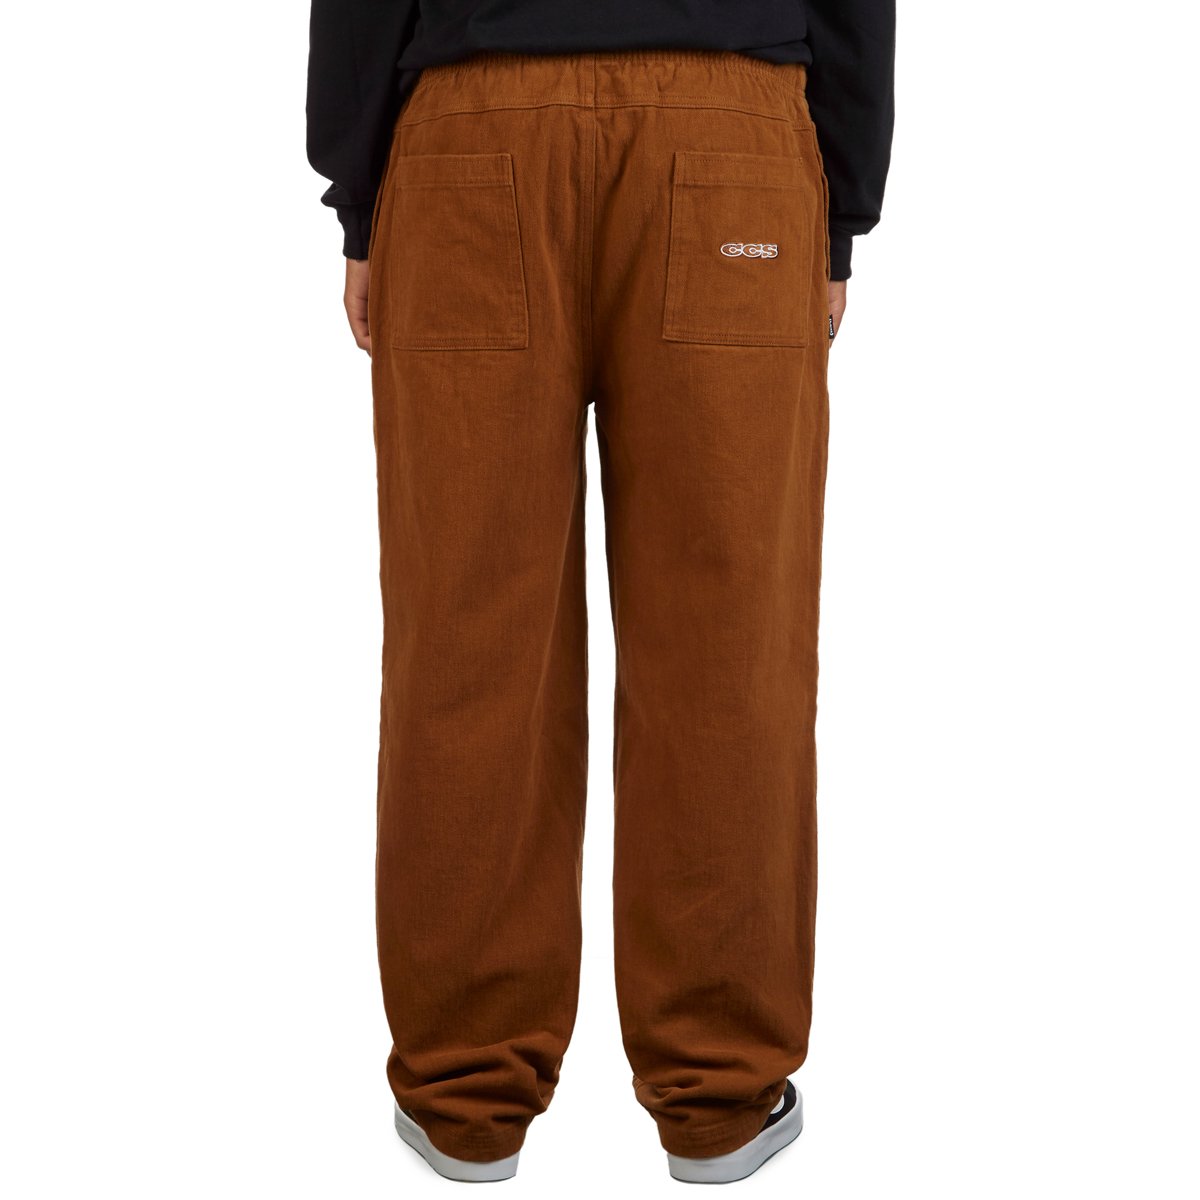 CCS Easy Twill Pants - Duck Brown image 3